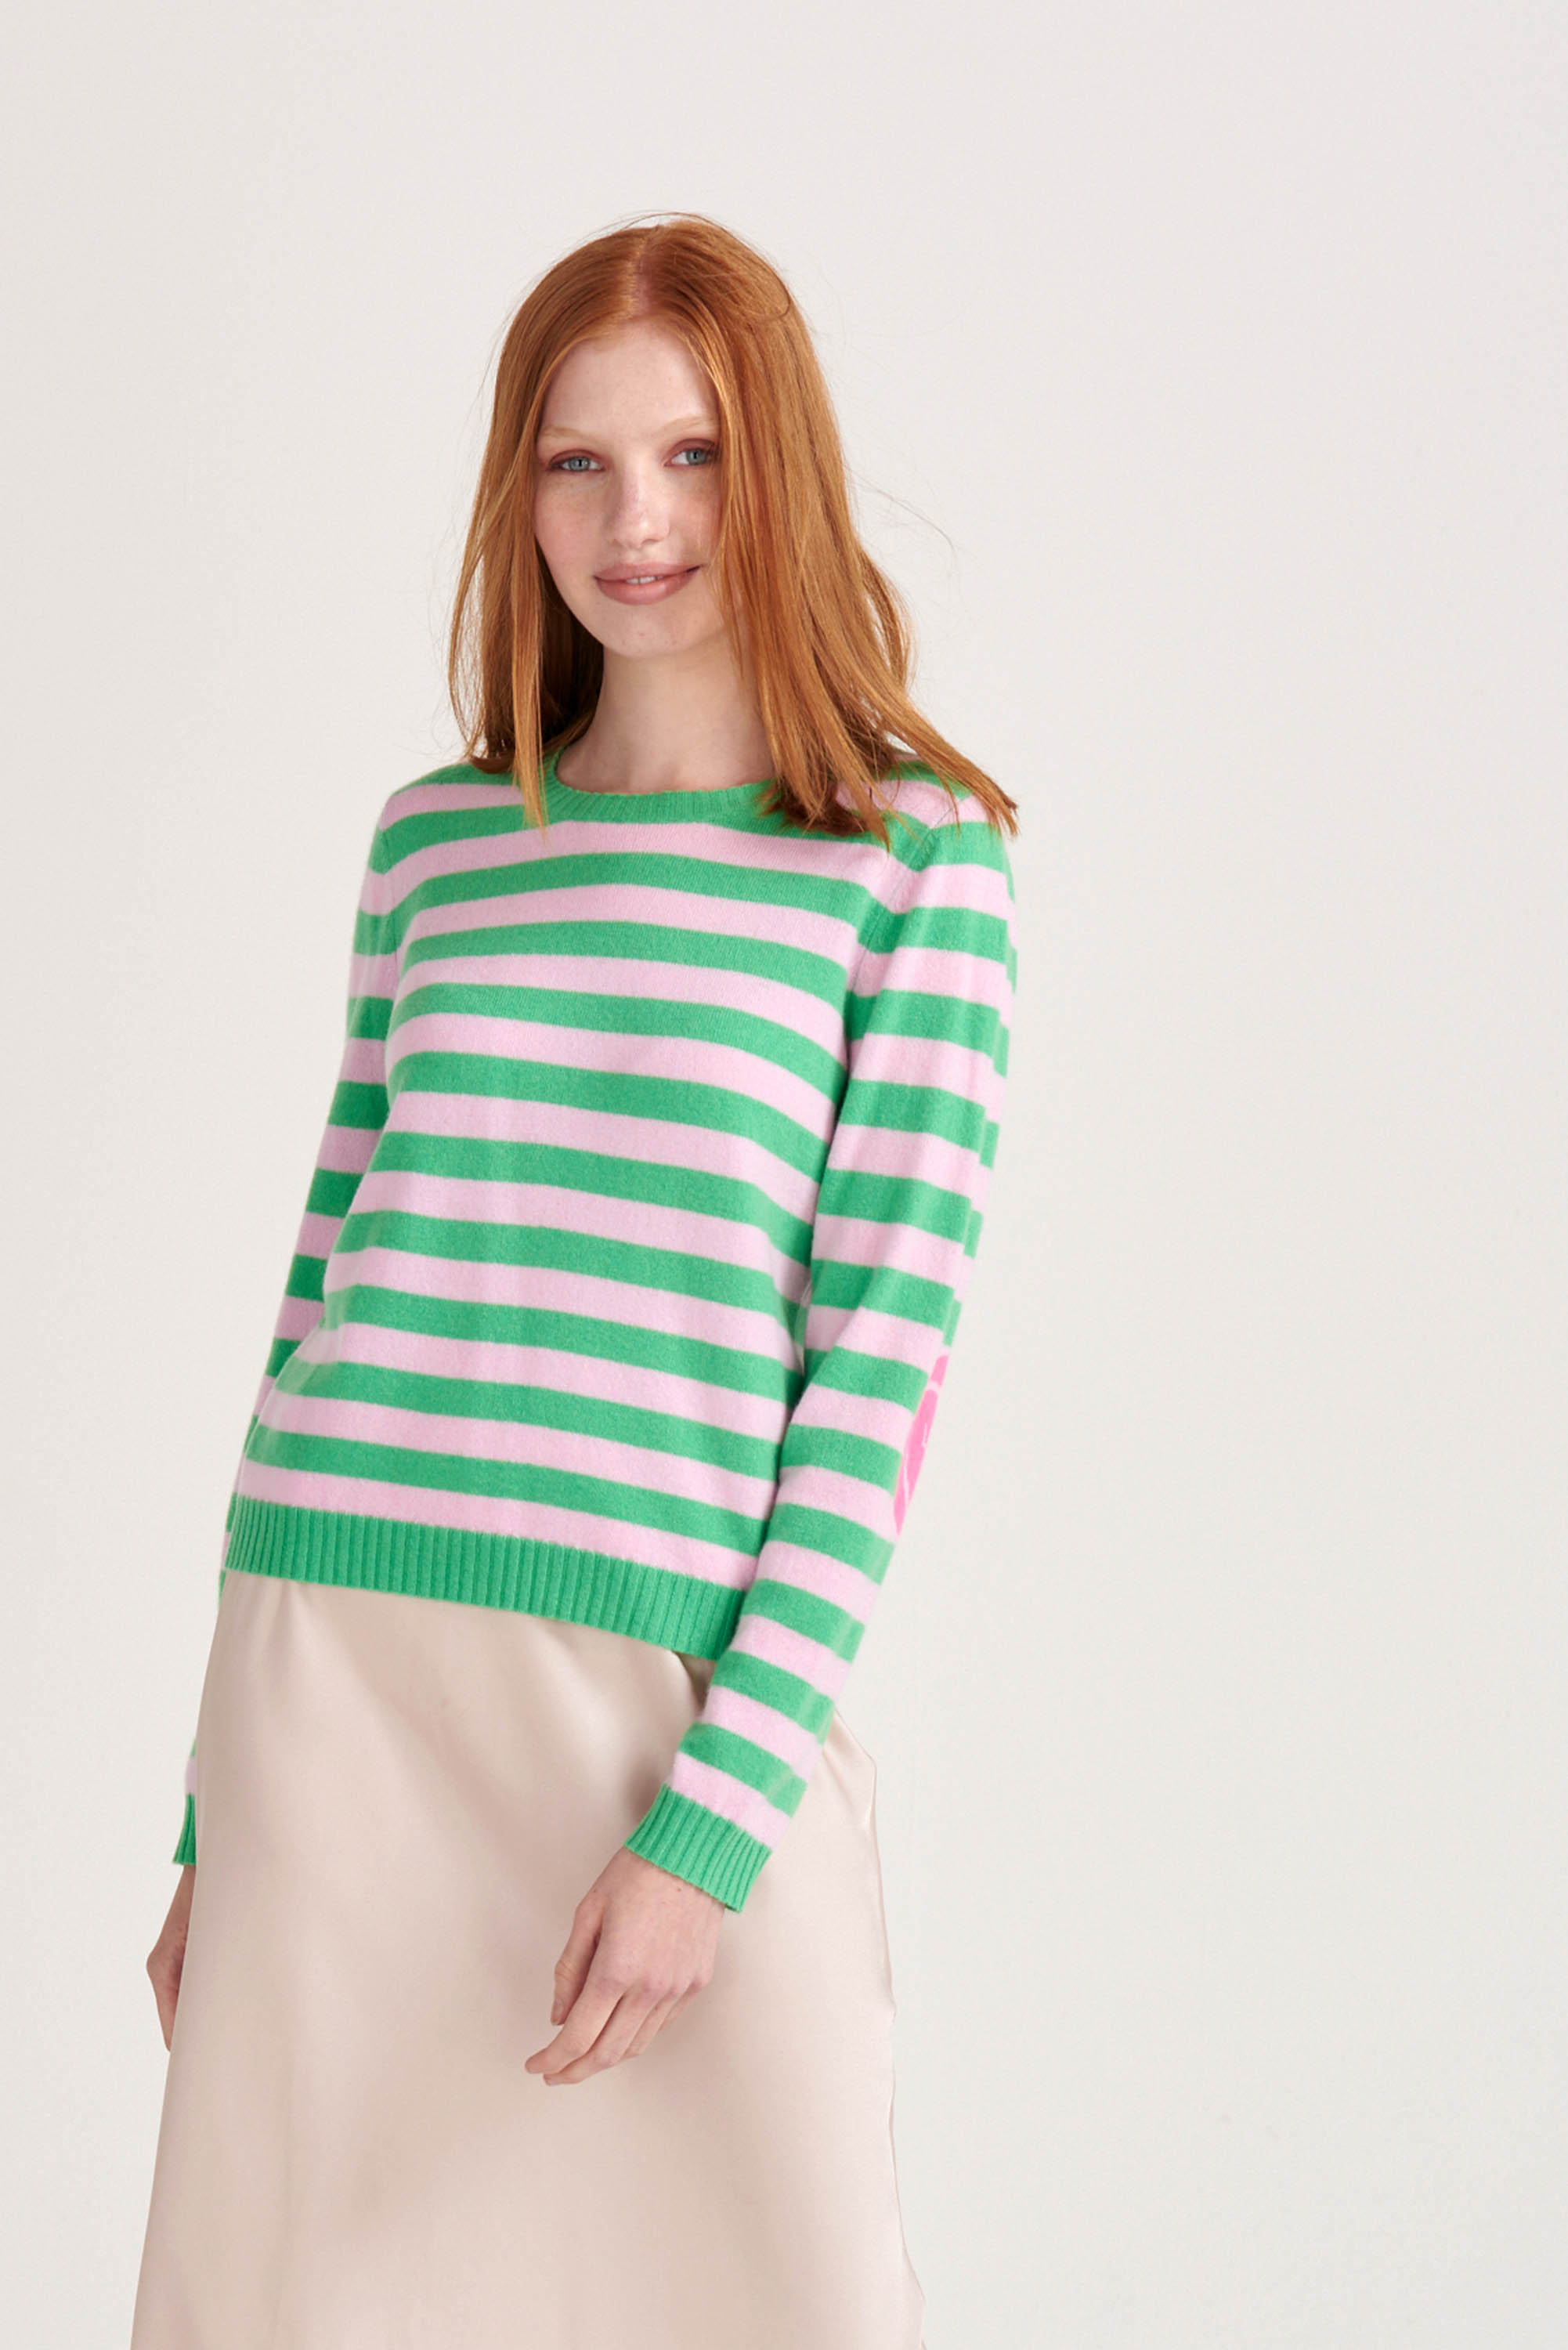 Red haired female model wearing Jumper1234 Bright green and pink stripe cashmere crew neck jumper with neon pink love heart intarsia elbow patches